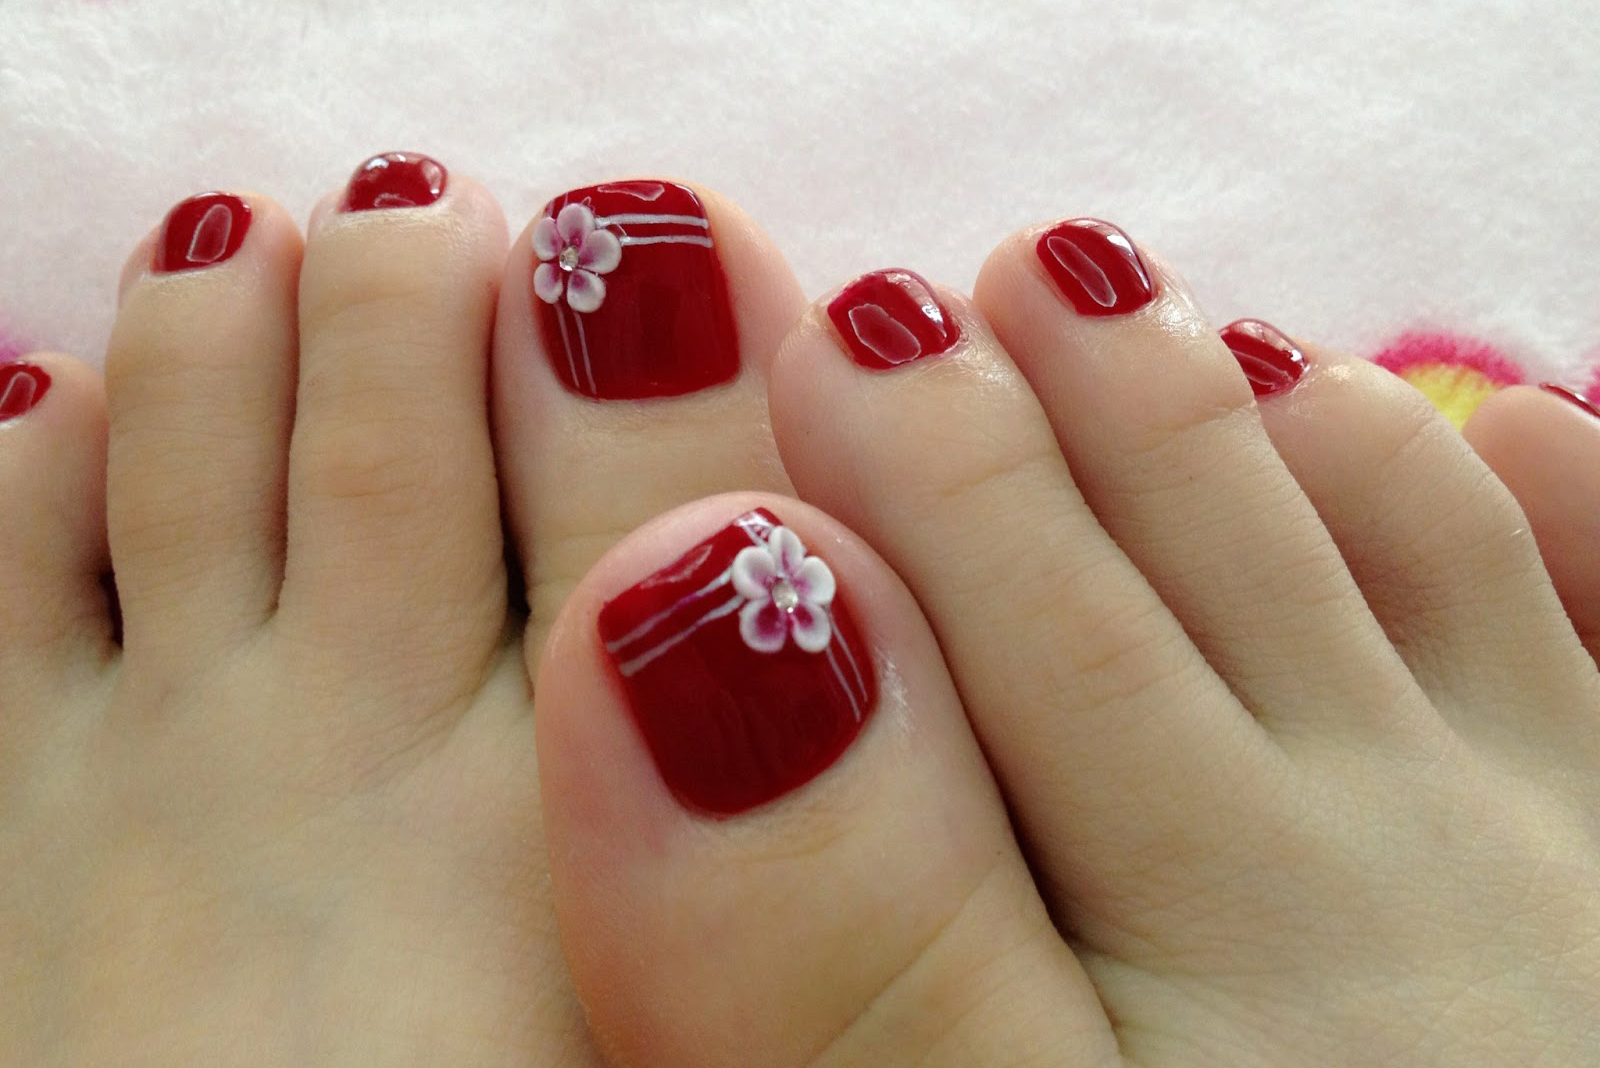 Red Nail Art Pedicure Ideas - wide 8